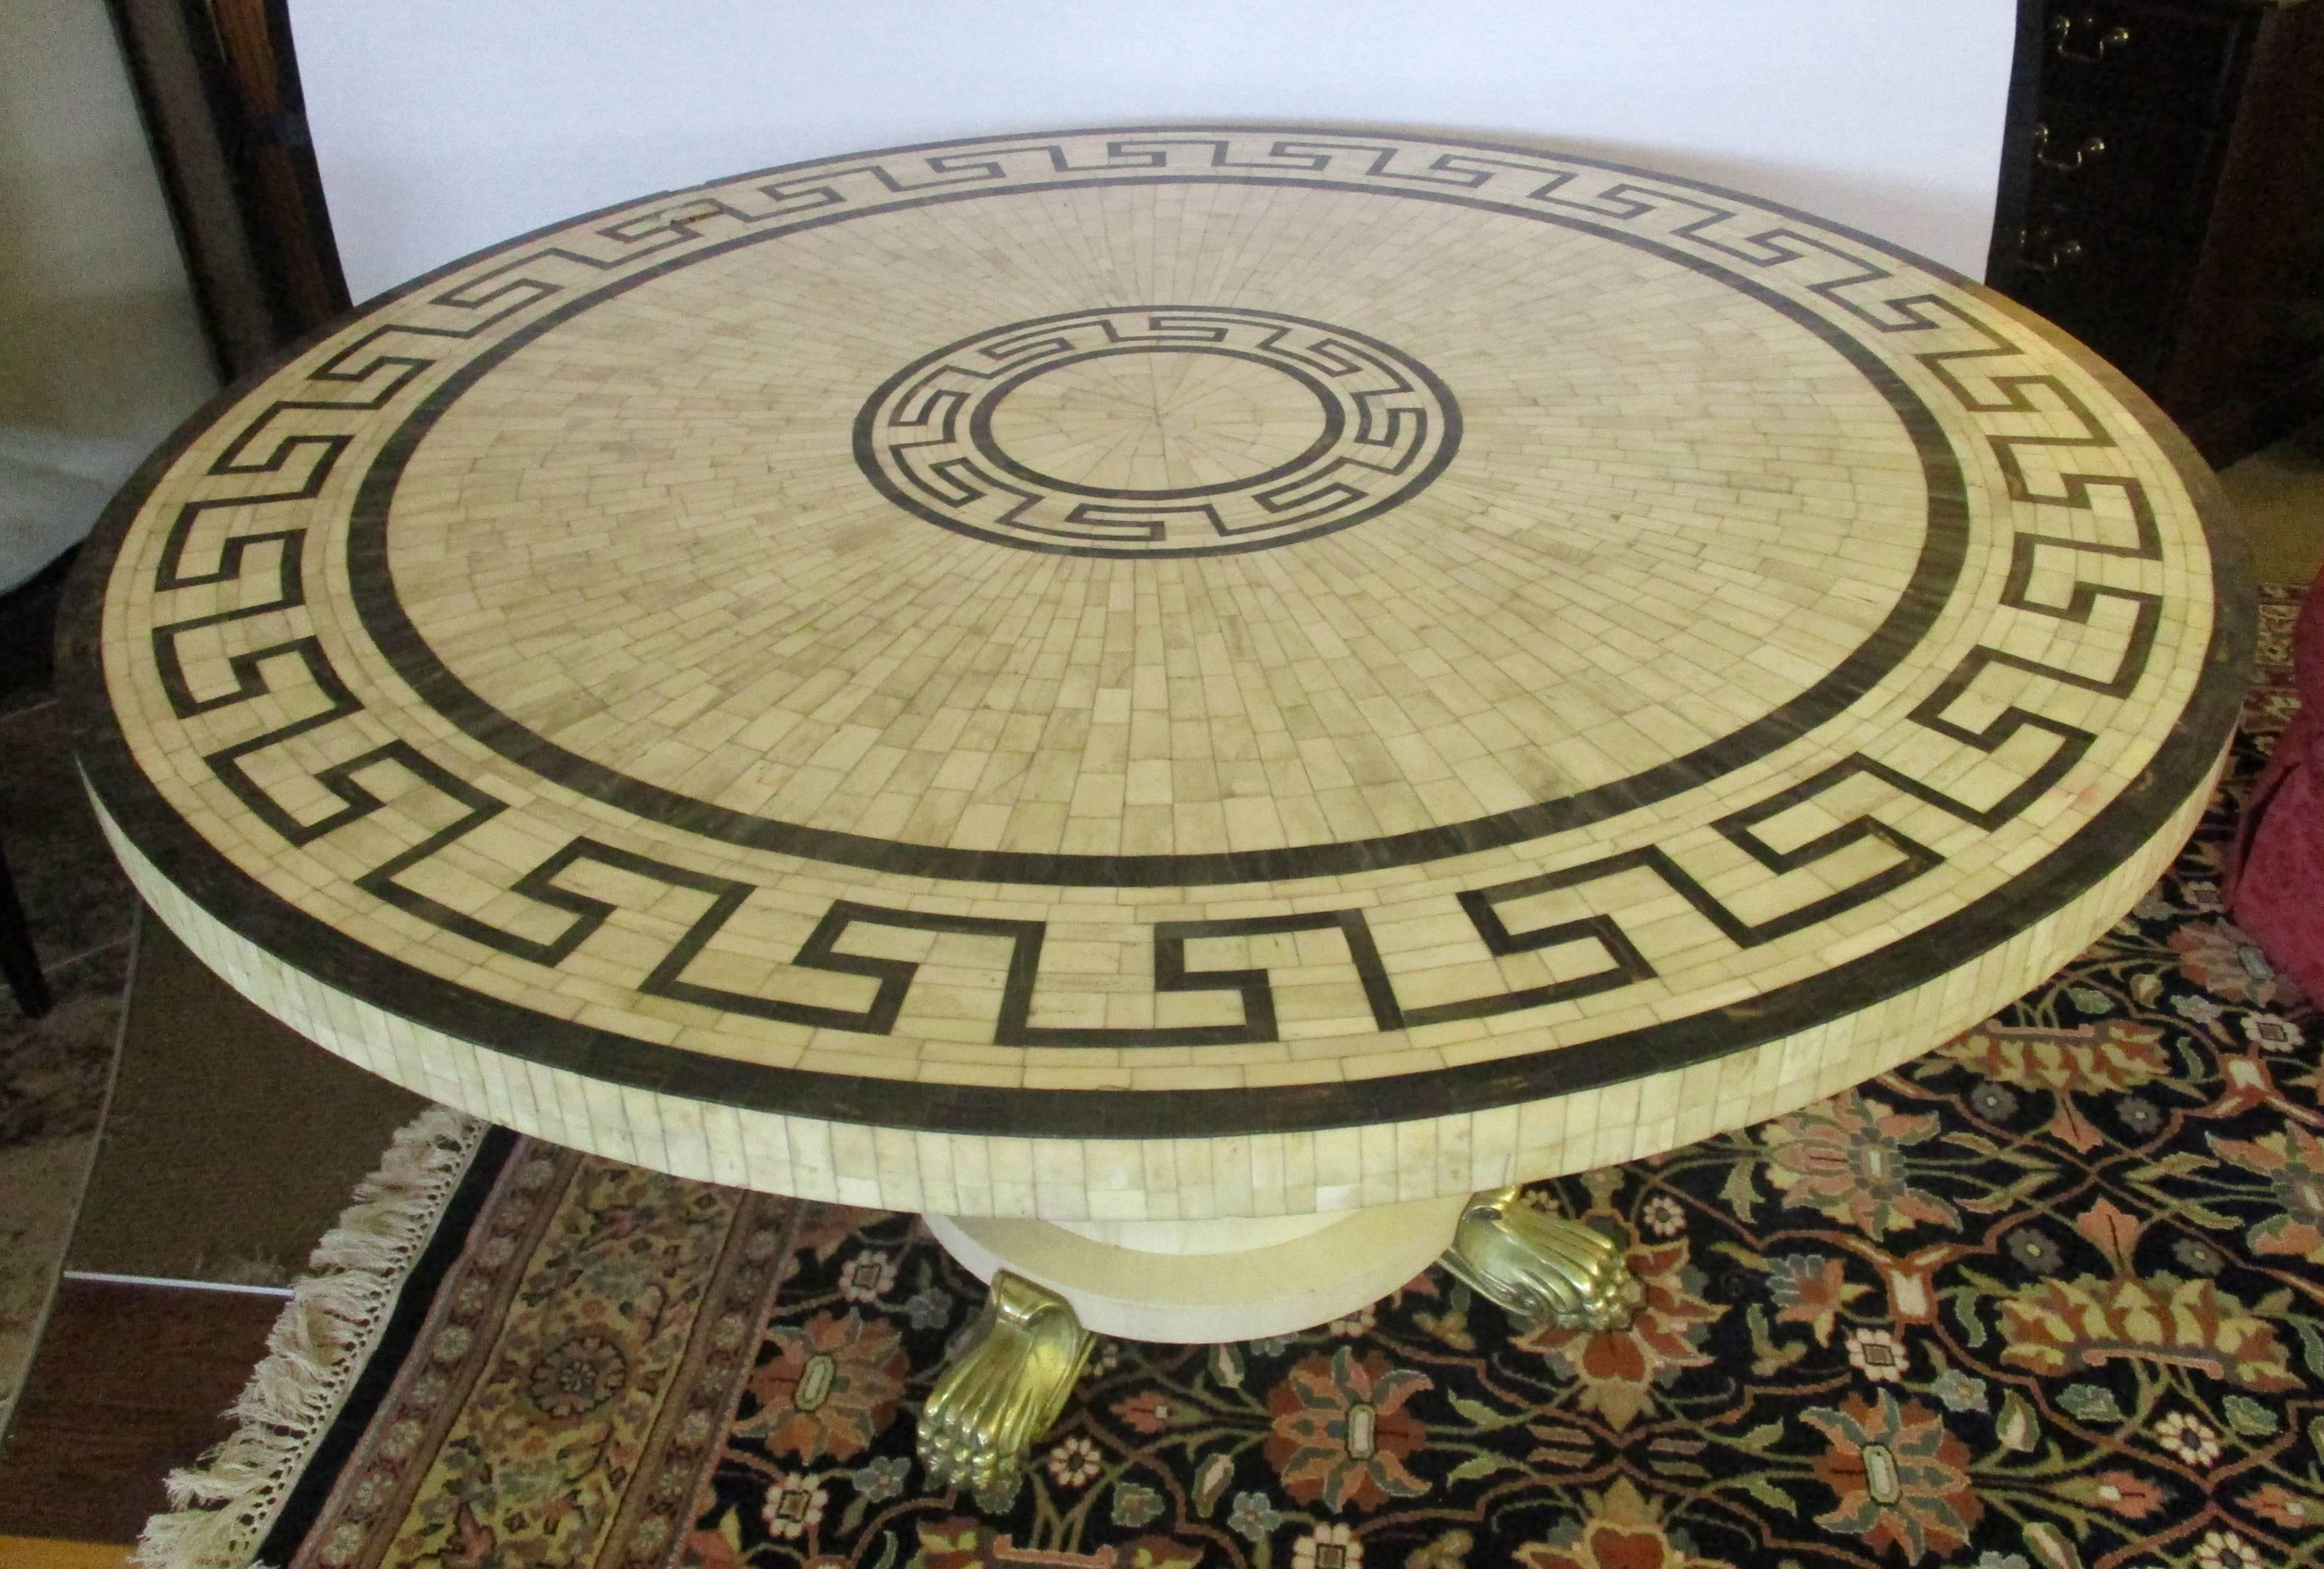 Magnificent one-of-a-kind custom round dining or center table in a mosaic of black and white bone inlay in a Greek key pattern. Cream round would base has four brass paw feet with hidden castors for ease of movement.